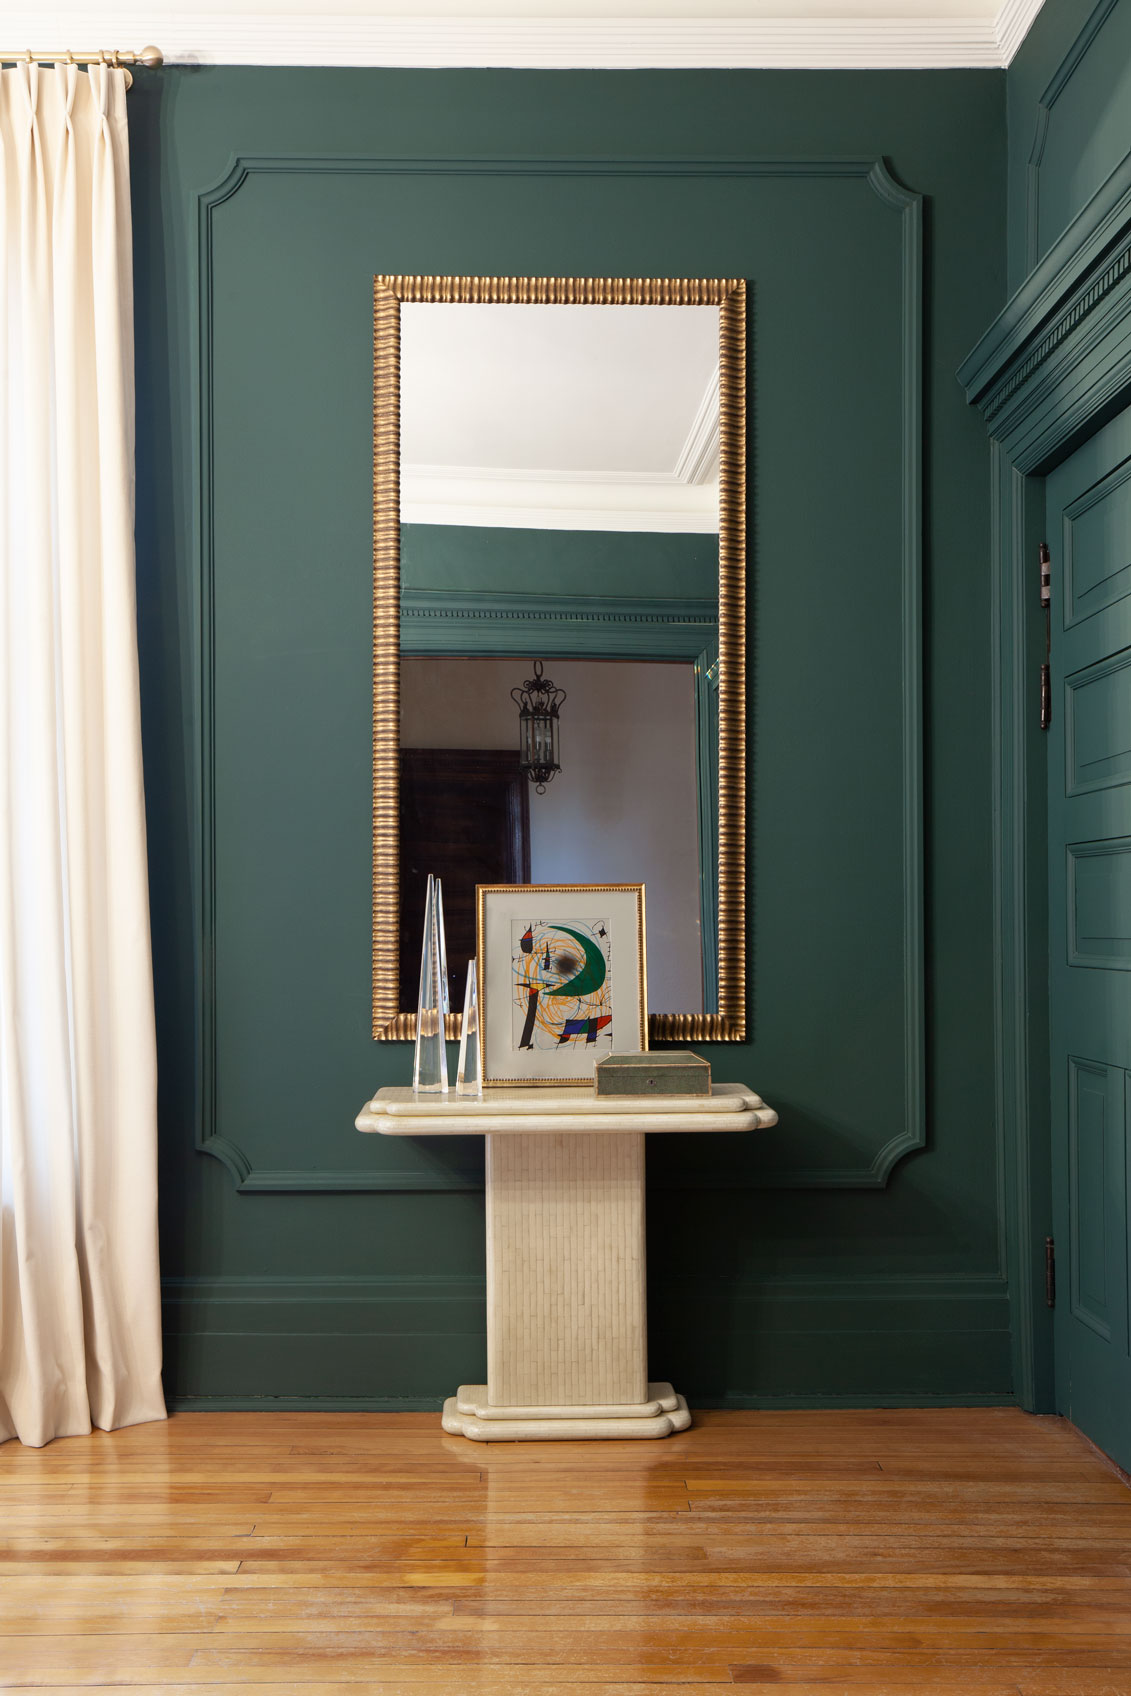 Dining Console Mirror